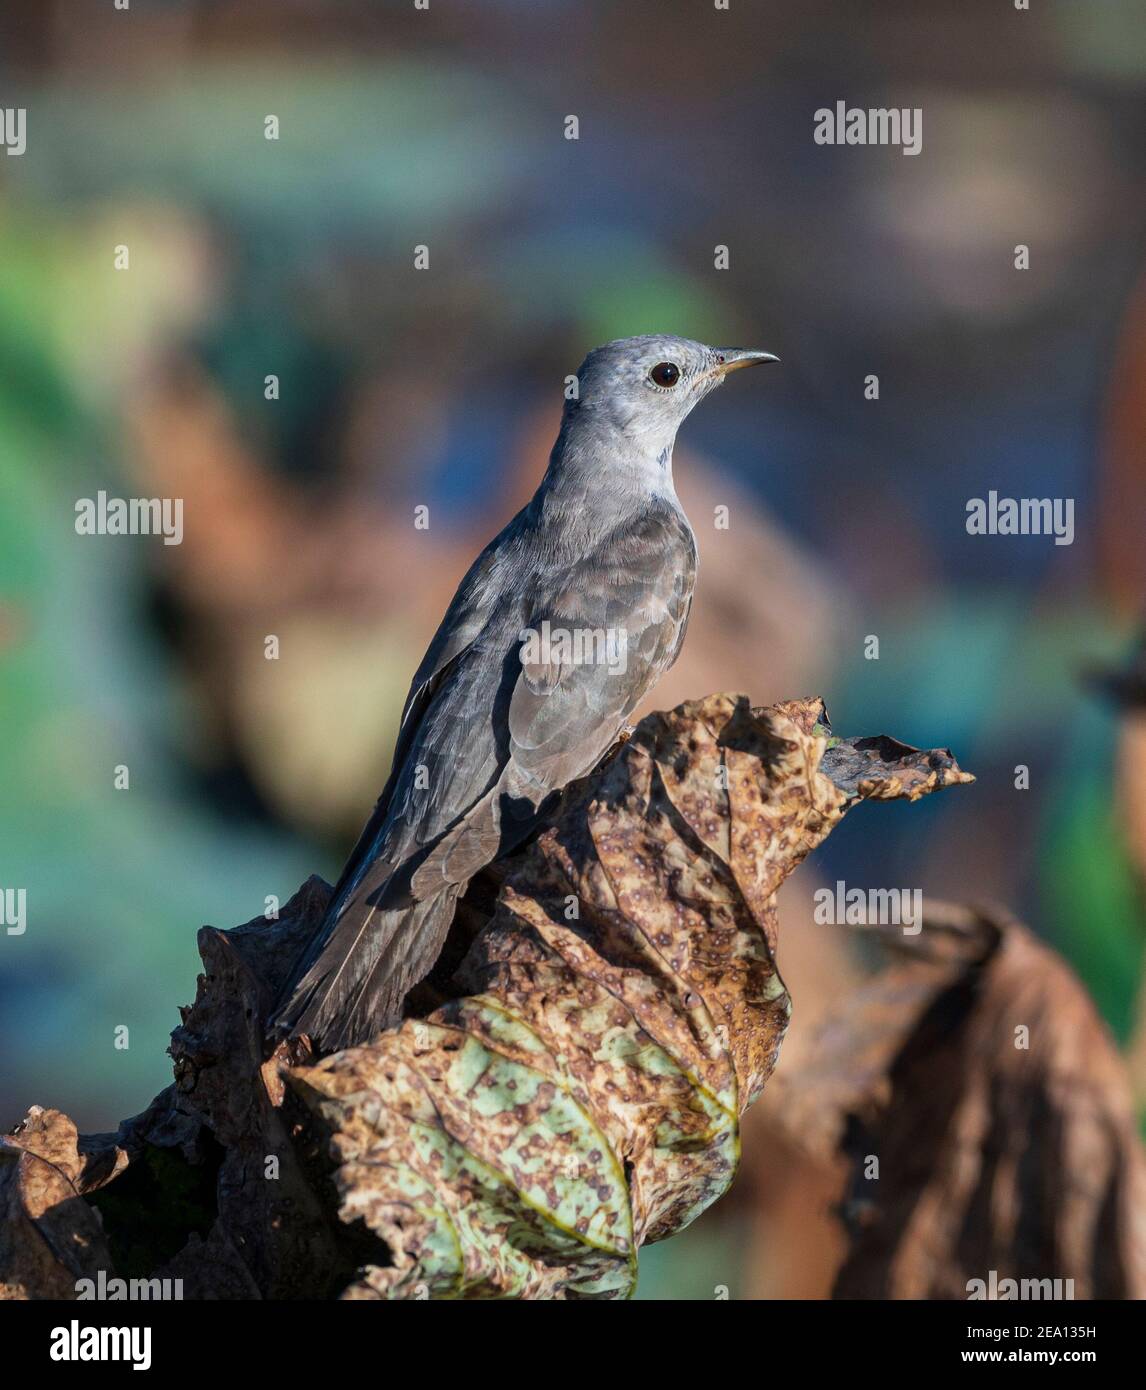 Vertical view of a Brush Cuckoo (Cacomantis variolosus) perched on a dead leaf, Fogg Dam, Northern Territory, NT, Australia Stock Photo